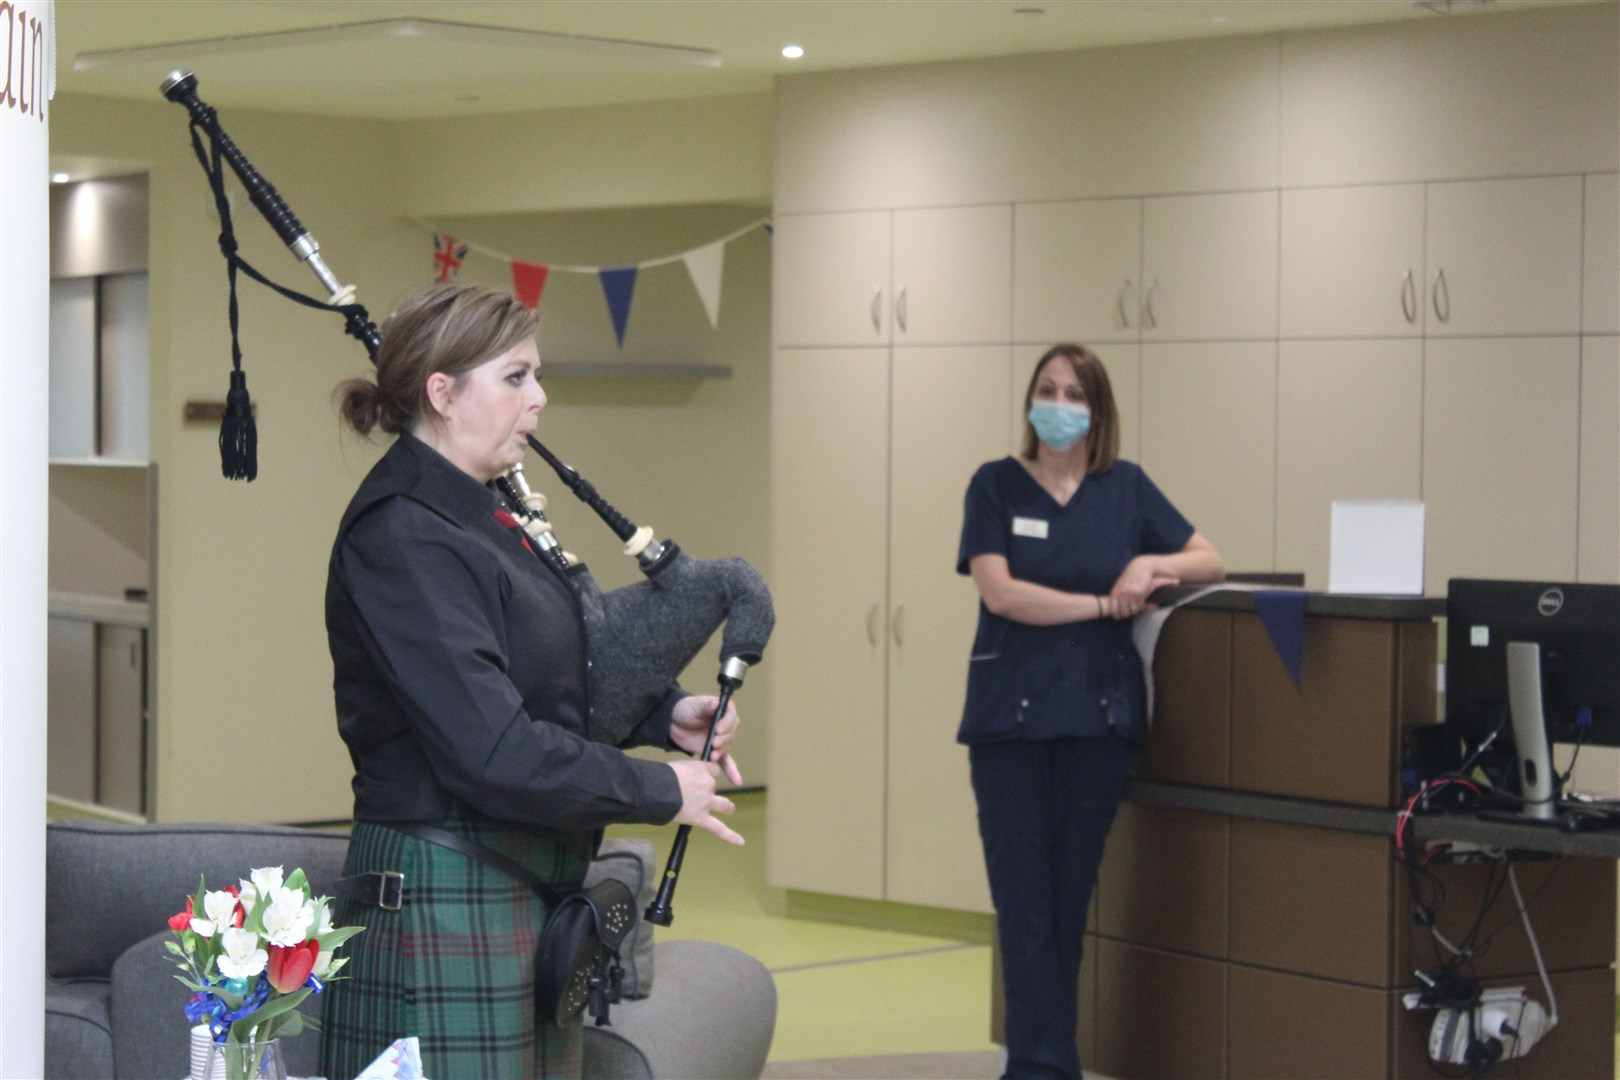 Nurse Joanna Dzialdowski played the bagpipes for the residents on the day.